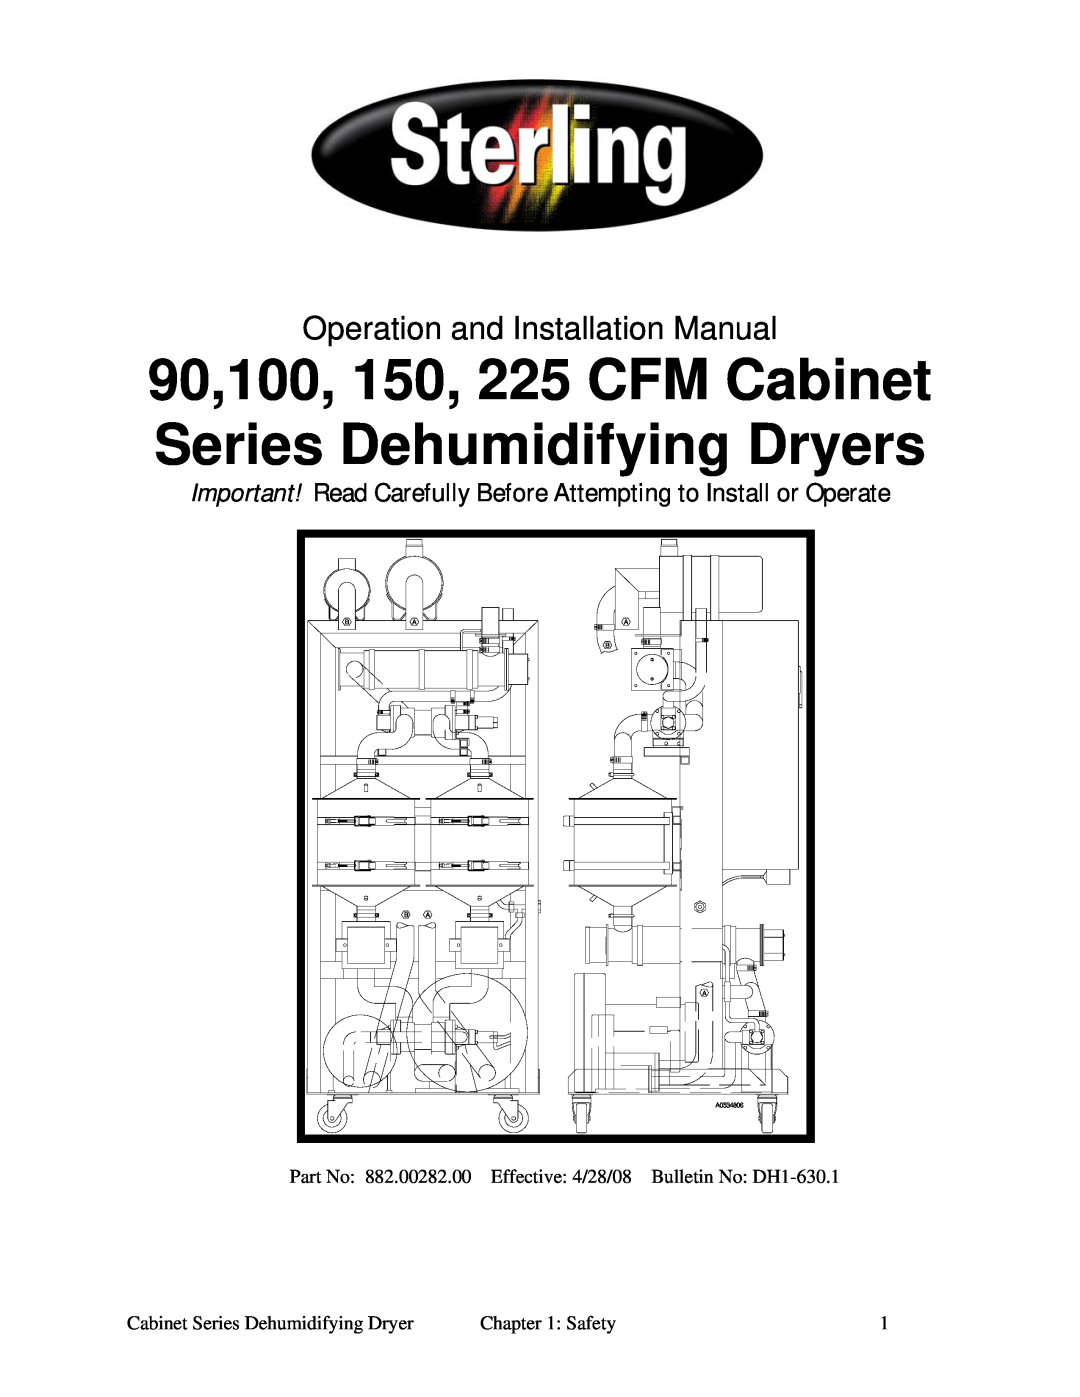 Sterling Plumbing 90 installation manual Operation and Installation Manual, Cabinet Series Dehumidifying Dryer, Safety 